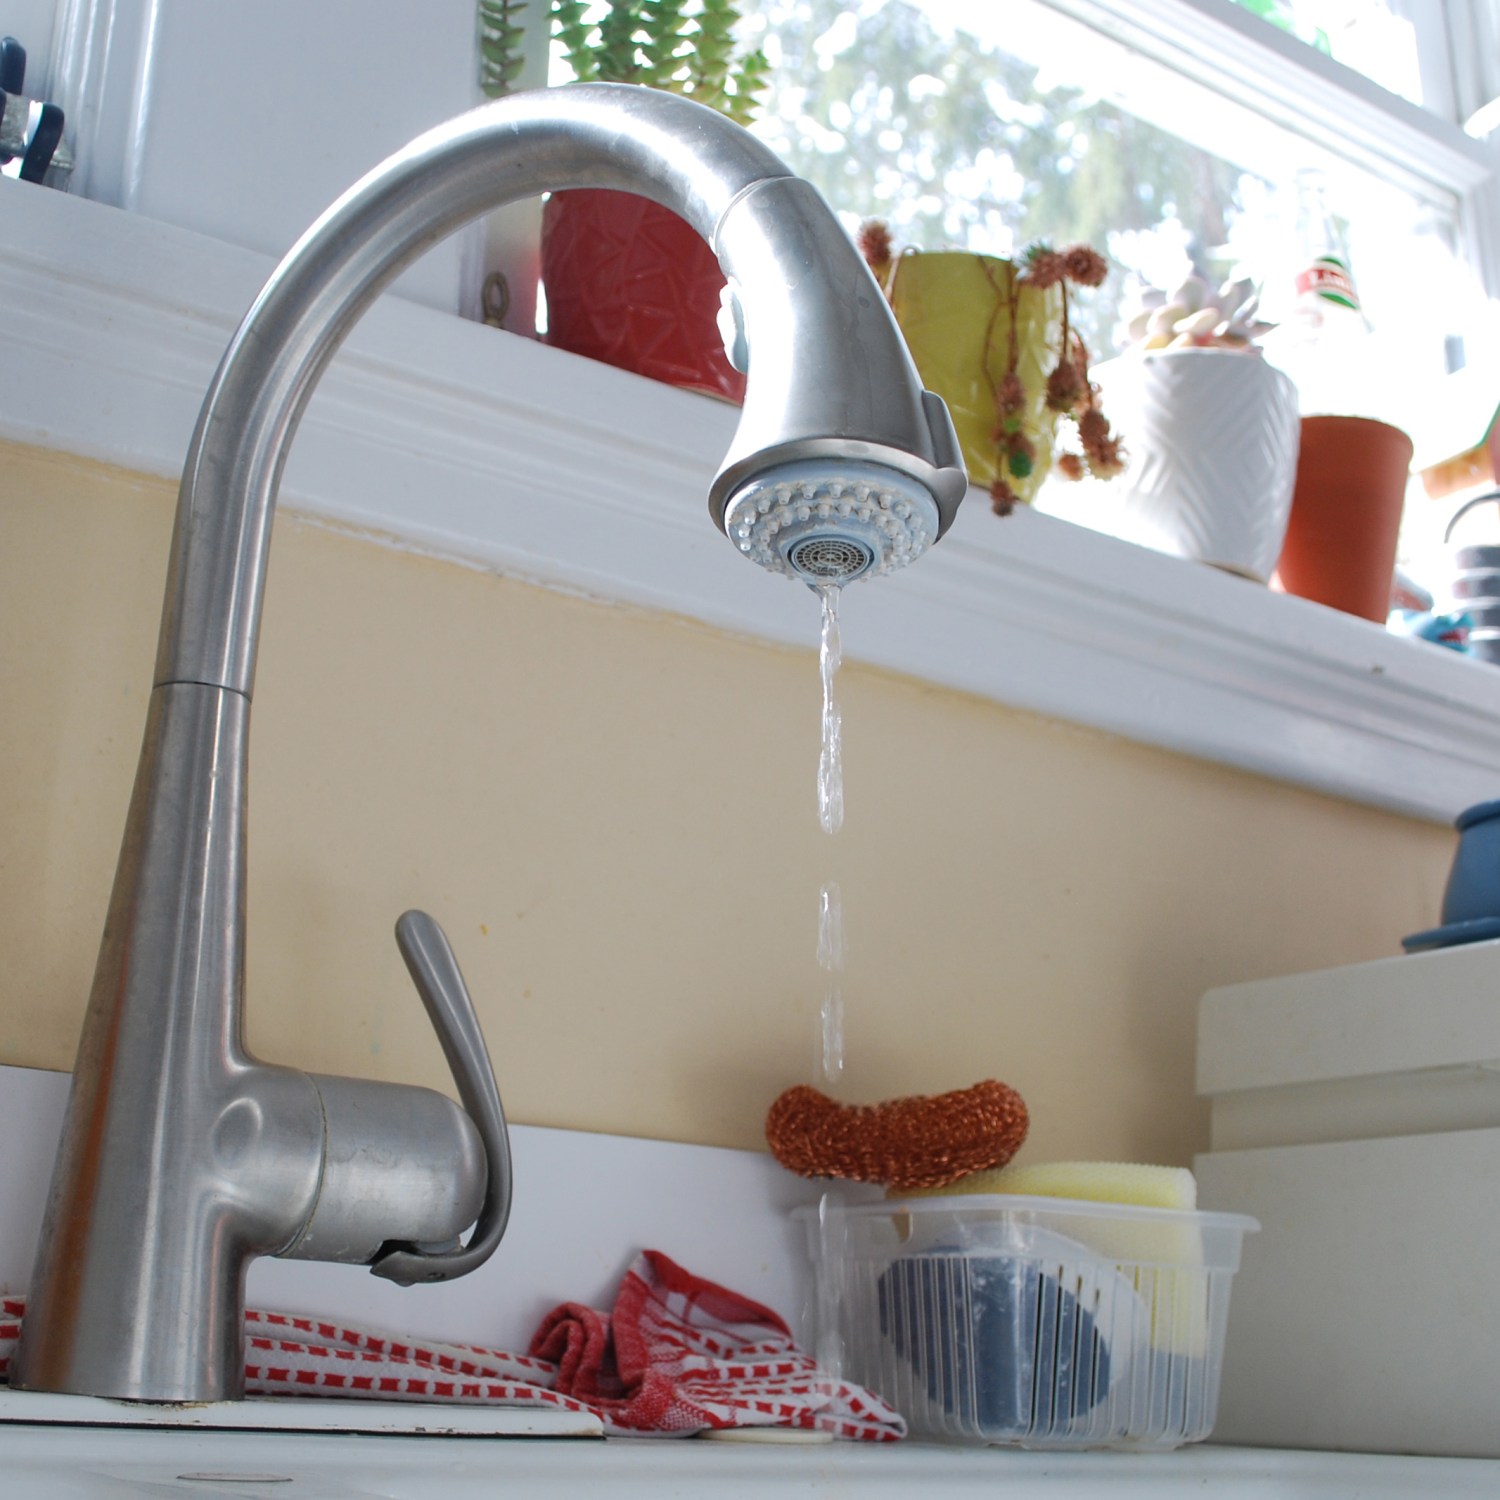 Dripping kitchen faucet